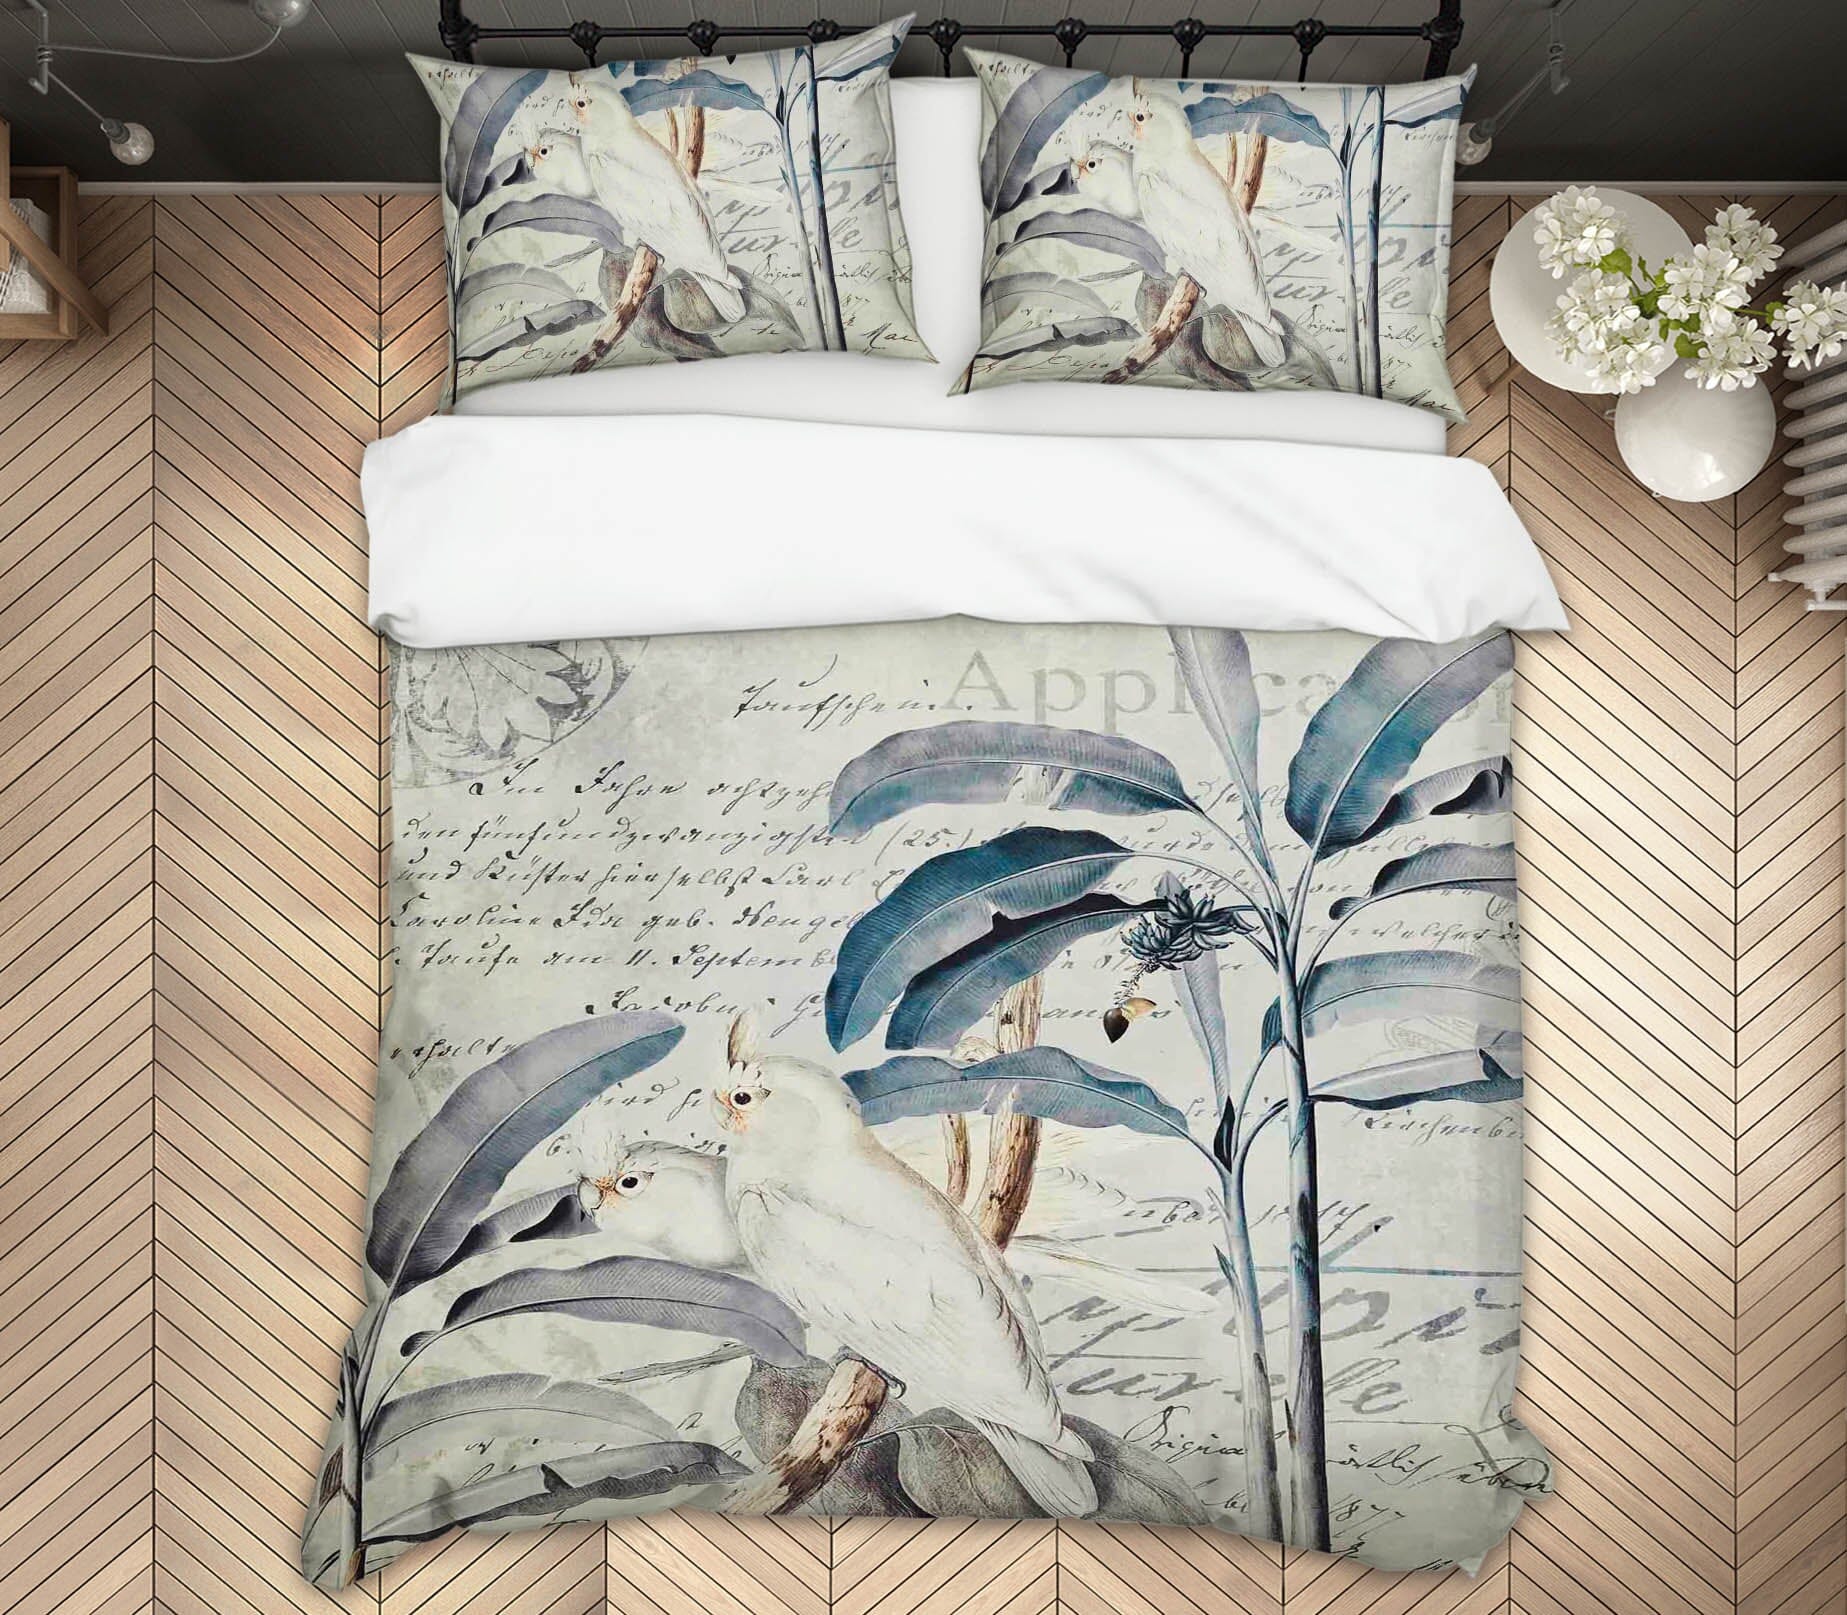 3D White Parrot 2131 Andrea haase Bedding Bed Pillowcases Quilt Quiet Covers AJ Creativity Home 